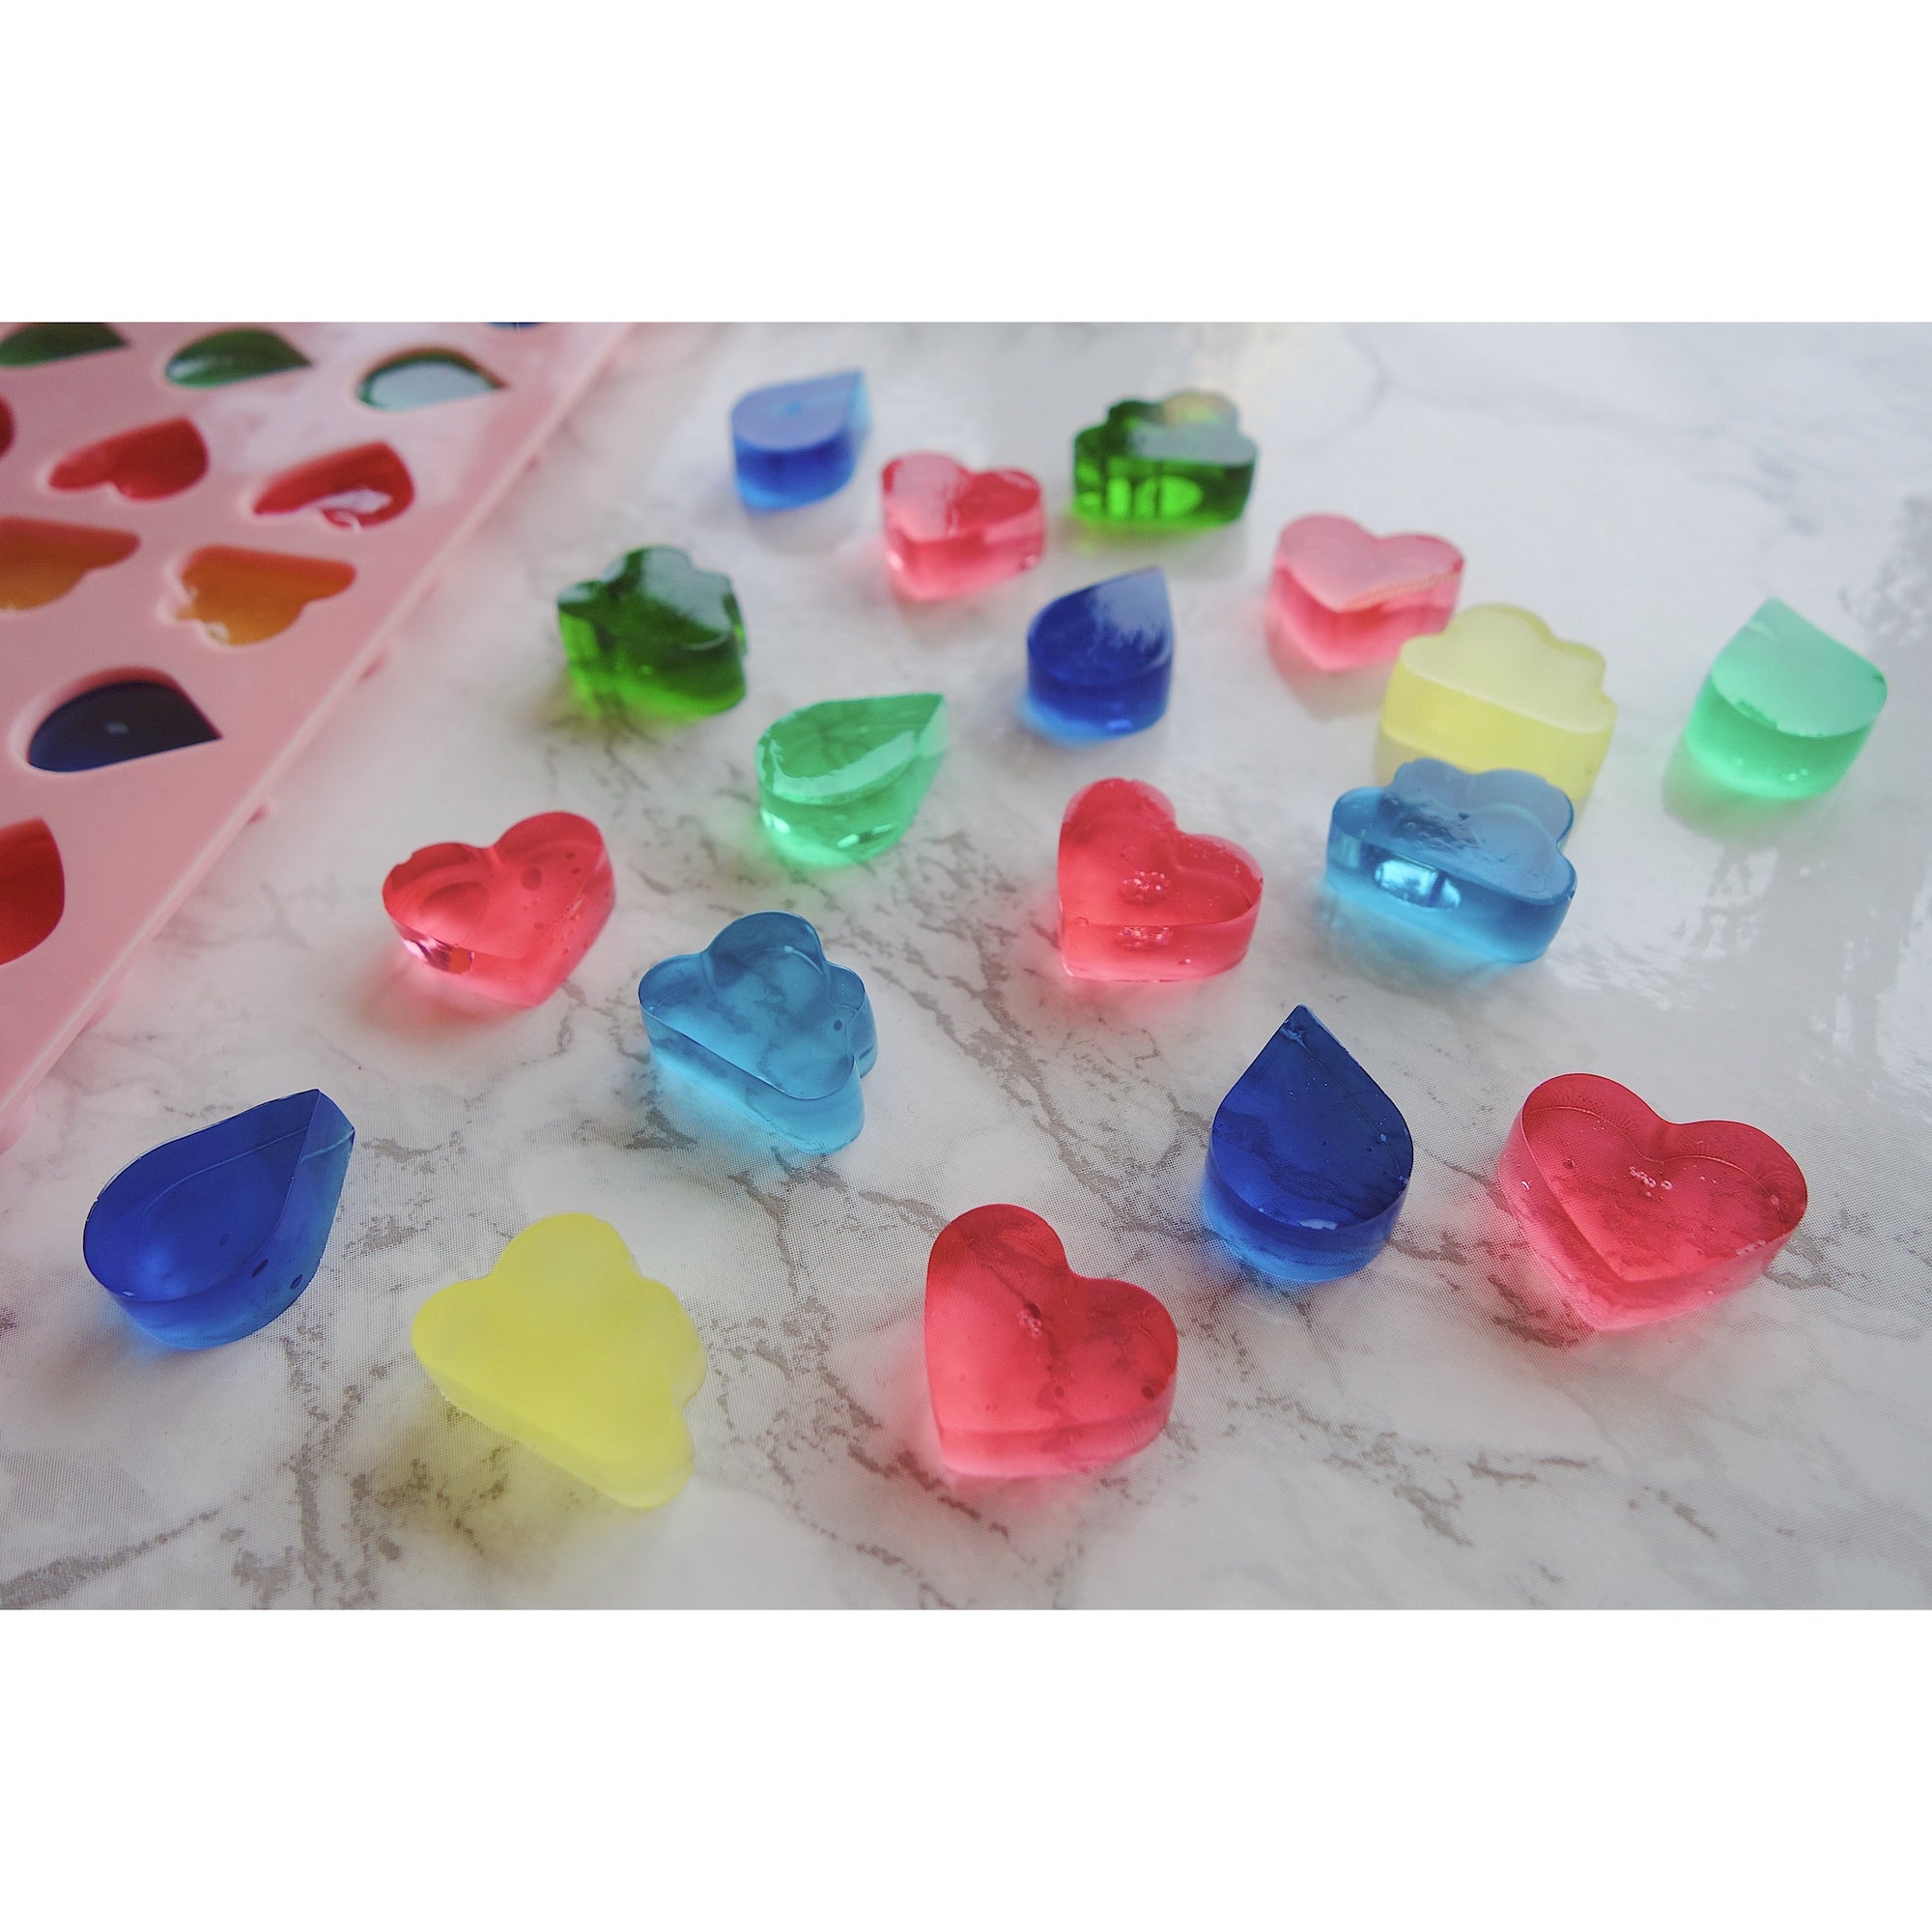 Bite-Size Heart, Cloud & Raindrop Silicone Mold (2 Pack) - Yummy